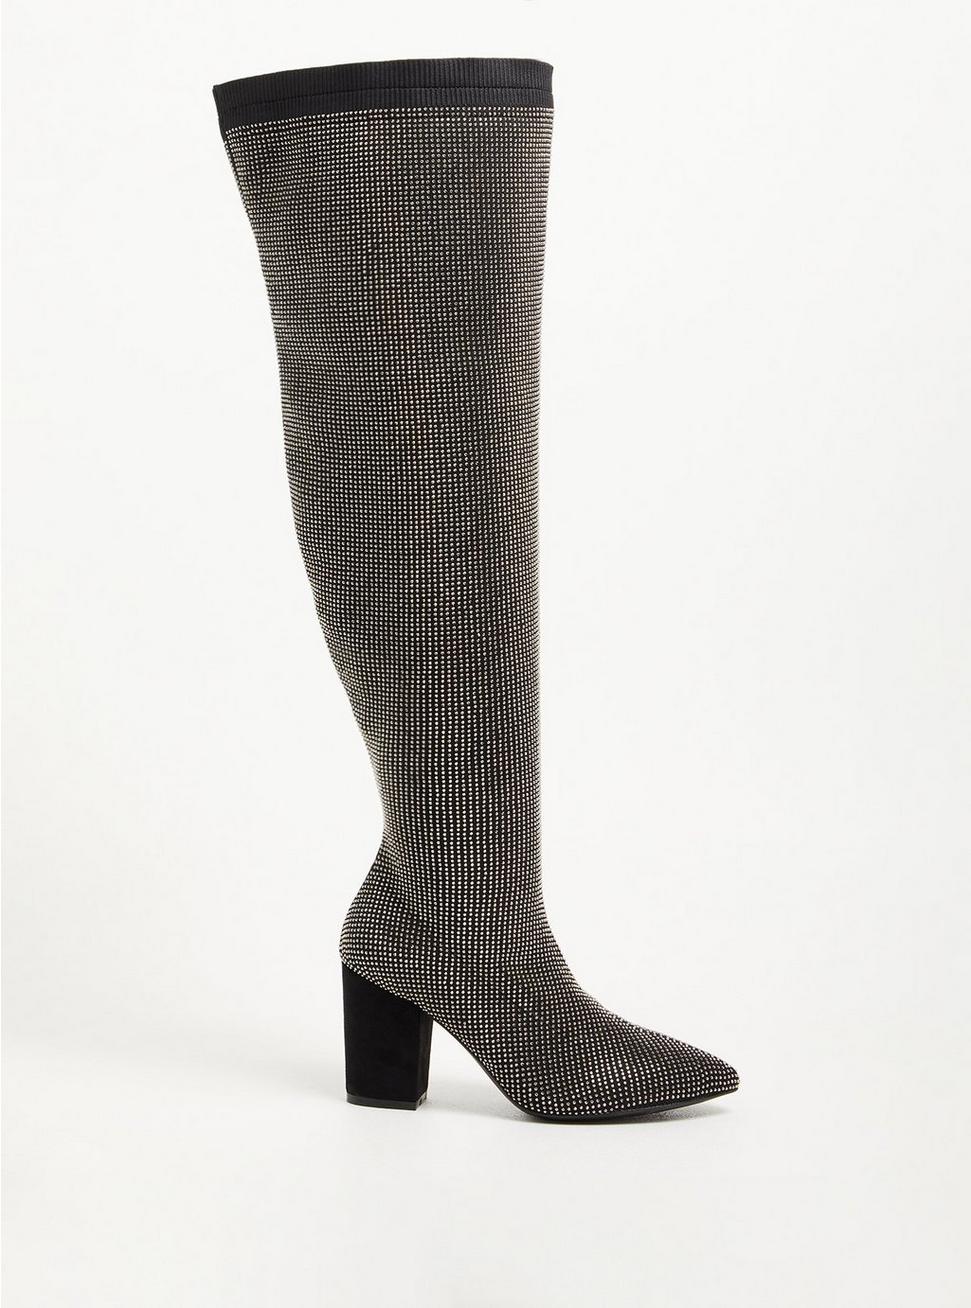 Over The Knee Heel Boot - Stretch Knit Studded Black (WW), BLACK, hi-res